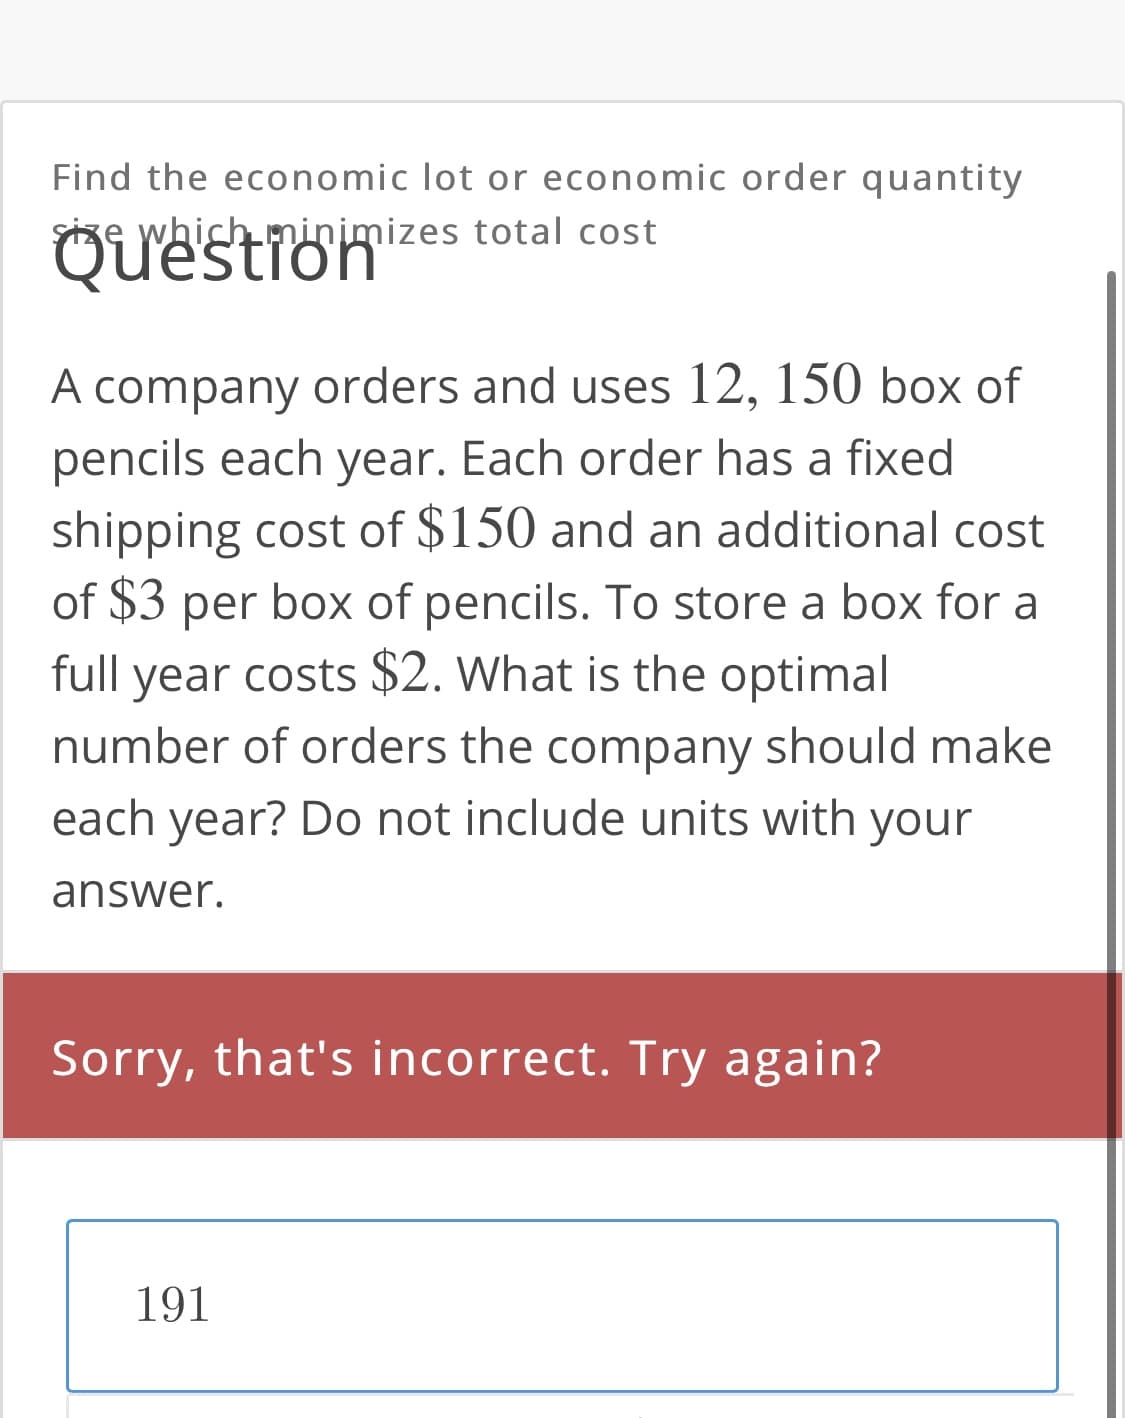 Find the economic lot or economic order quantity
Size which minimizes total cost
Questron
A company orders and uses 12, 150 box of
pencils each year. Each order has a fixed
shipping cost of $150 and an additional cost
of $3 per box of pencils. To store a box for a
full year costs $2. What is the optimal
number of orders the company should make
each year? Do not include units with your
answer.
Sorry, that's incorrect. Try again?
191
